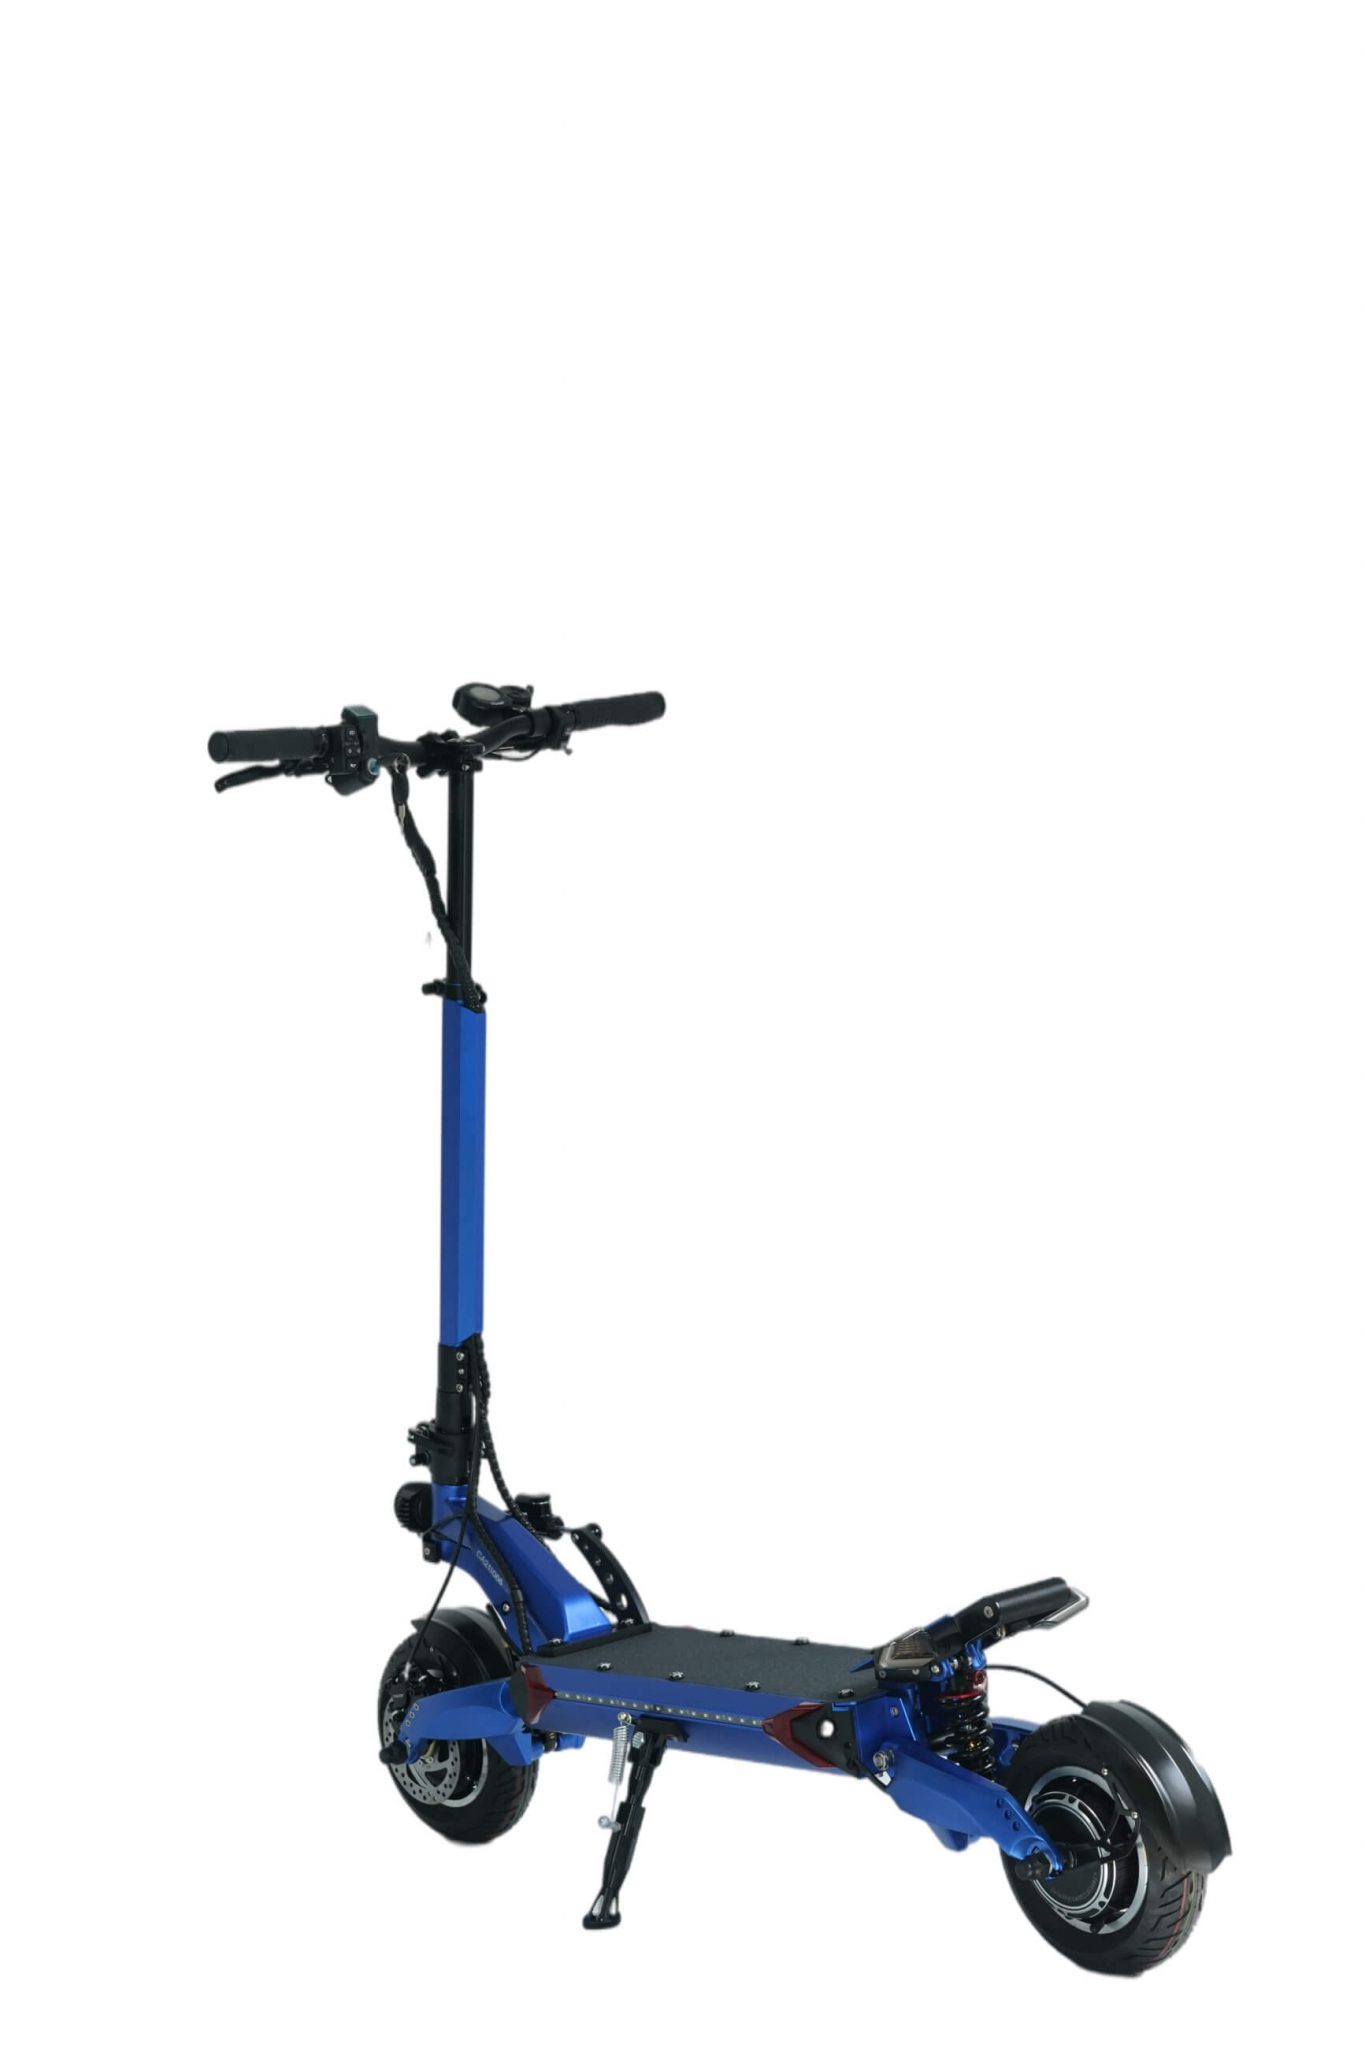 blade limited 10 inch 60V electric scooter blue color rear